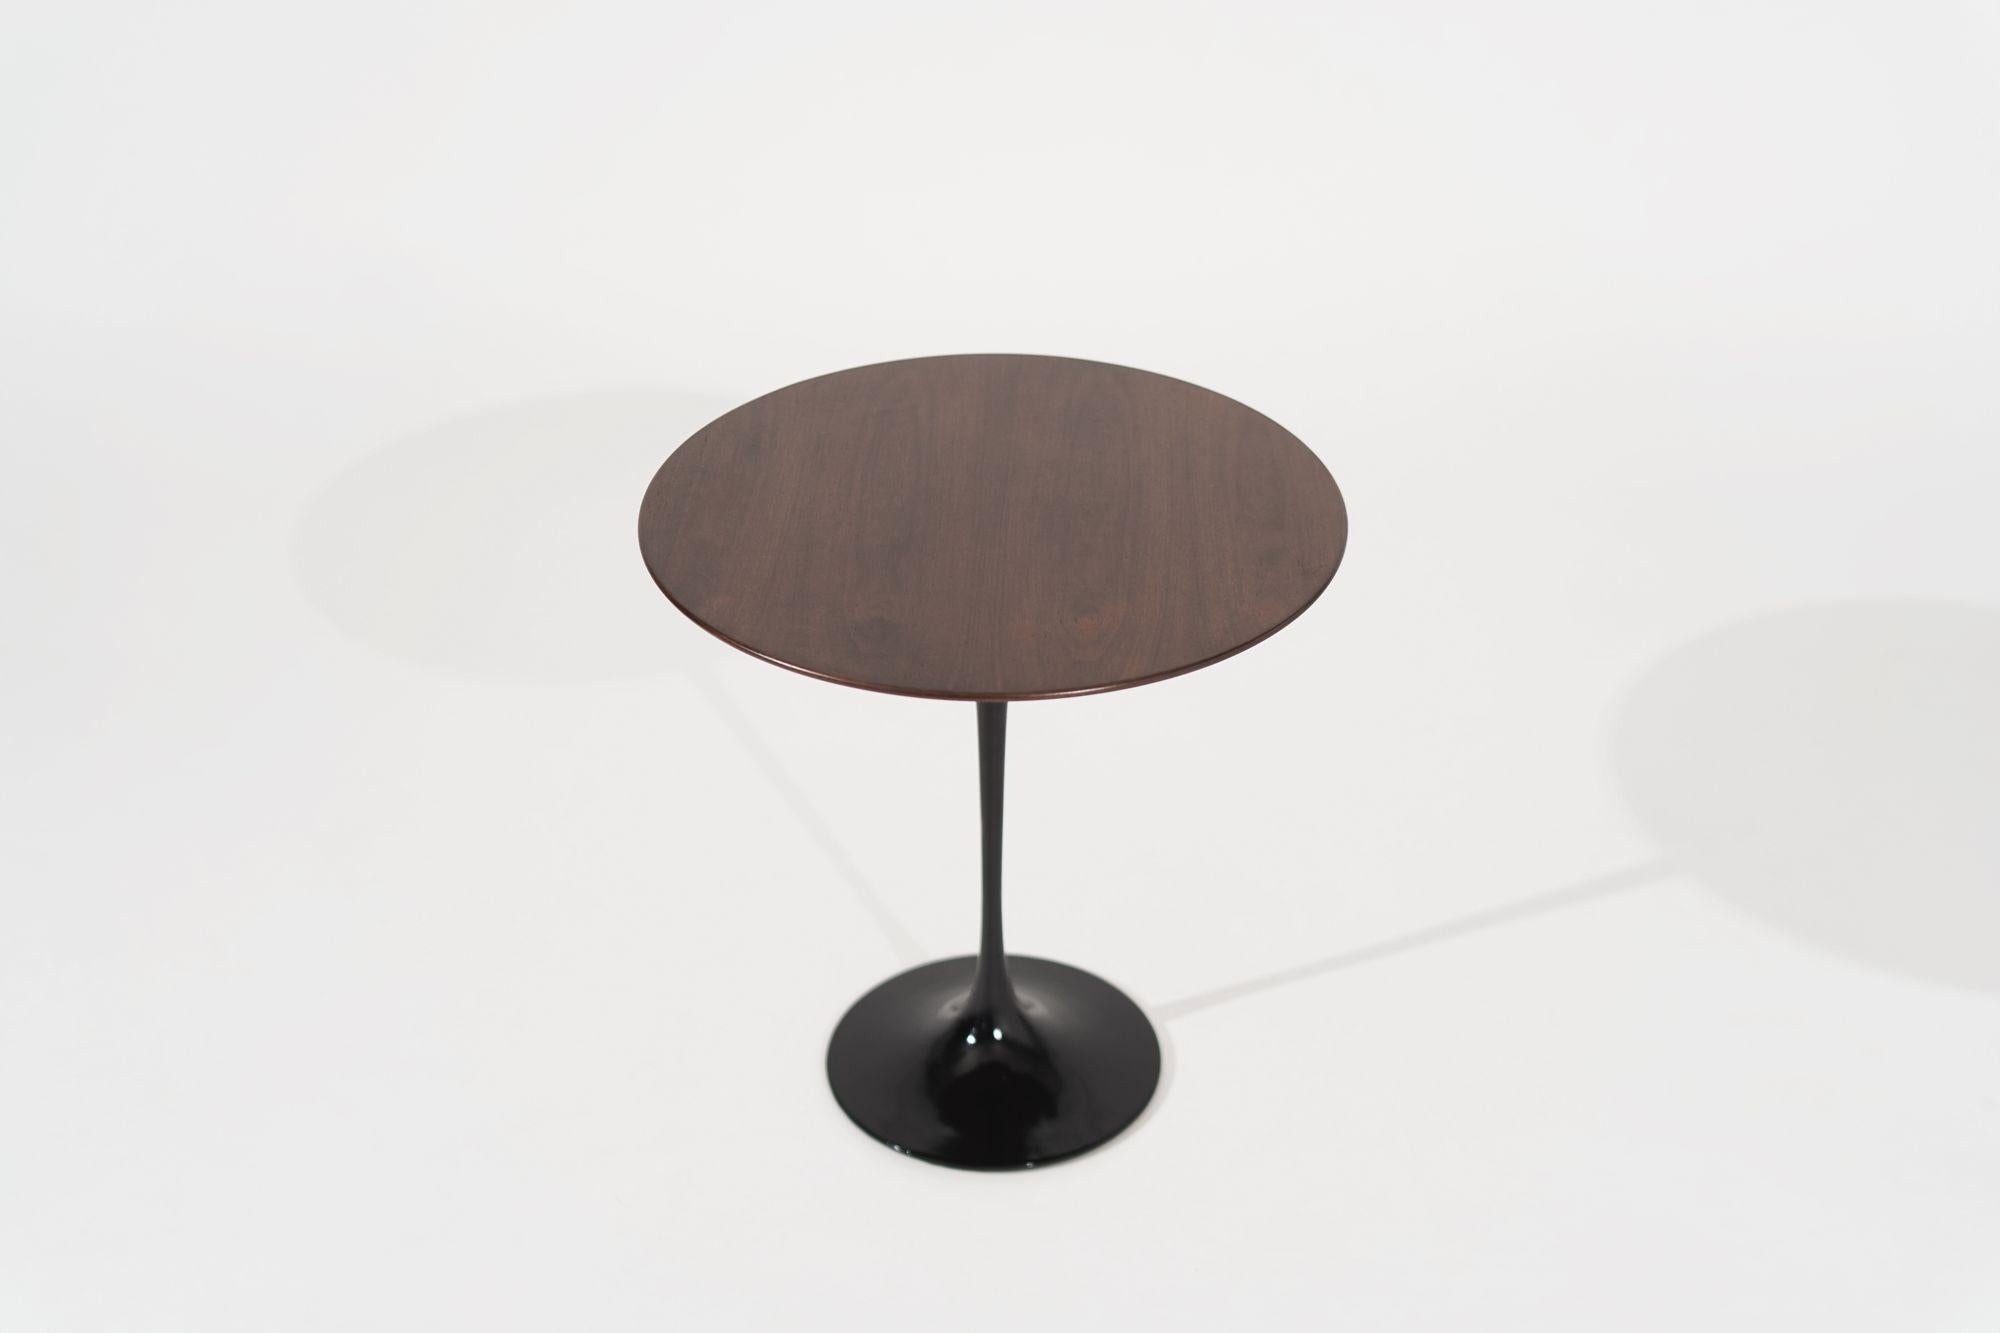 Knoll Occasional Table designed by Eero Saarinen. Base newly lacquered in black, walnut top fully restored. Very heavy early iron cast example with a higher manufacturing quality than the newer examples.
 
Other designers from this period include